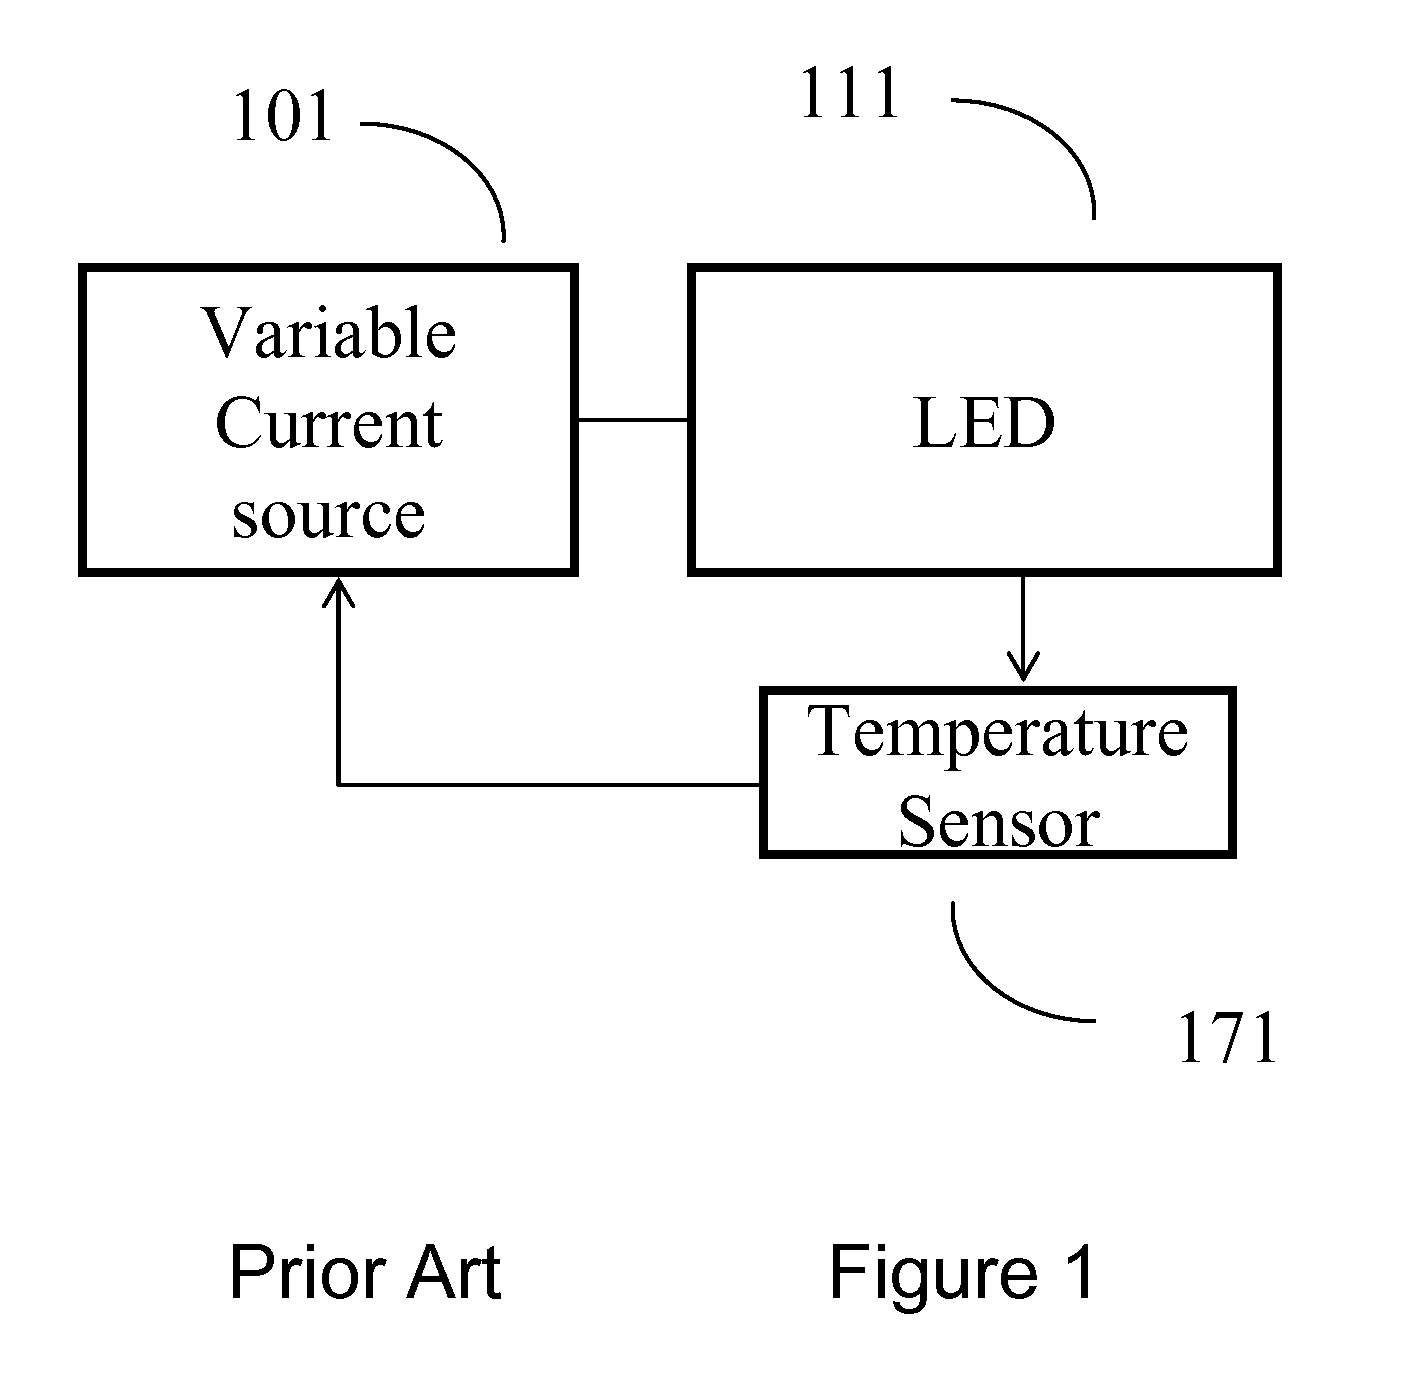 Apparatus and method to enhance the life of Light Emitting diode (LED) devices in an LED matrix